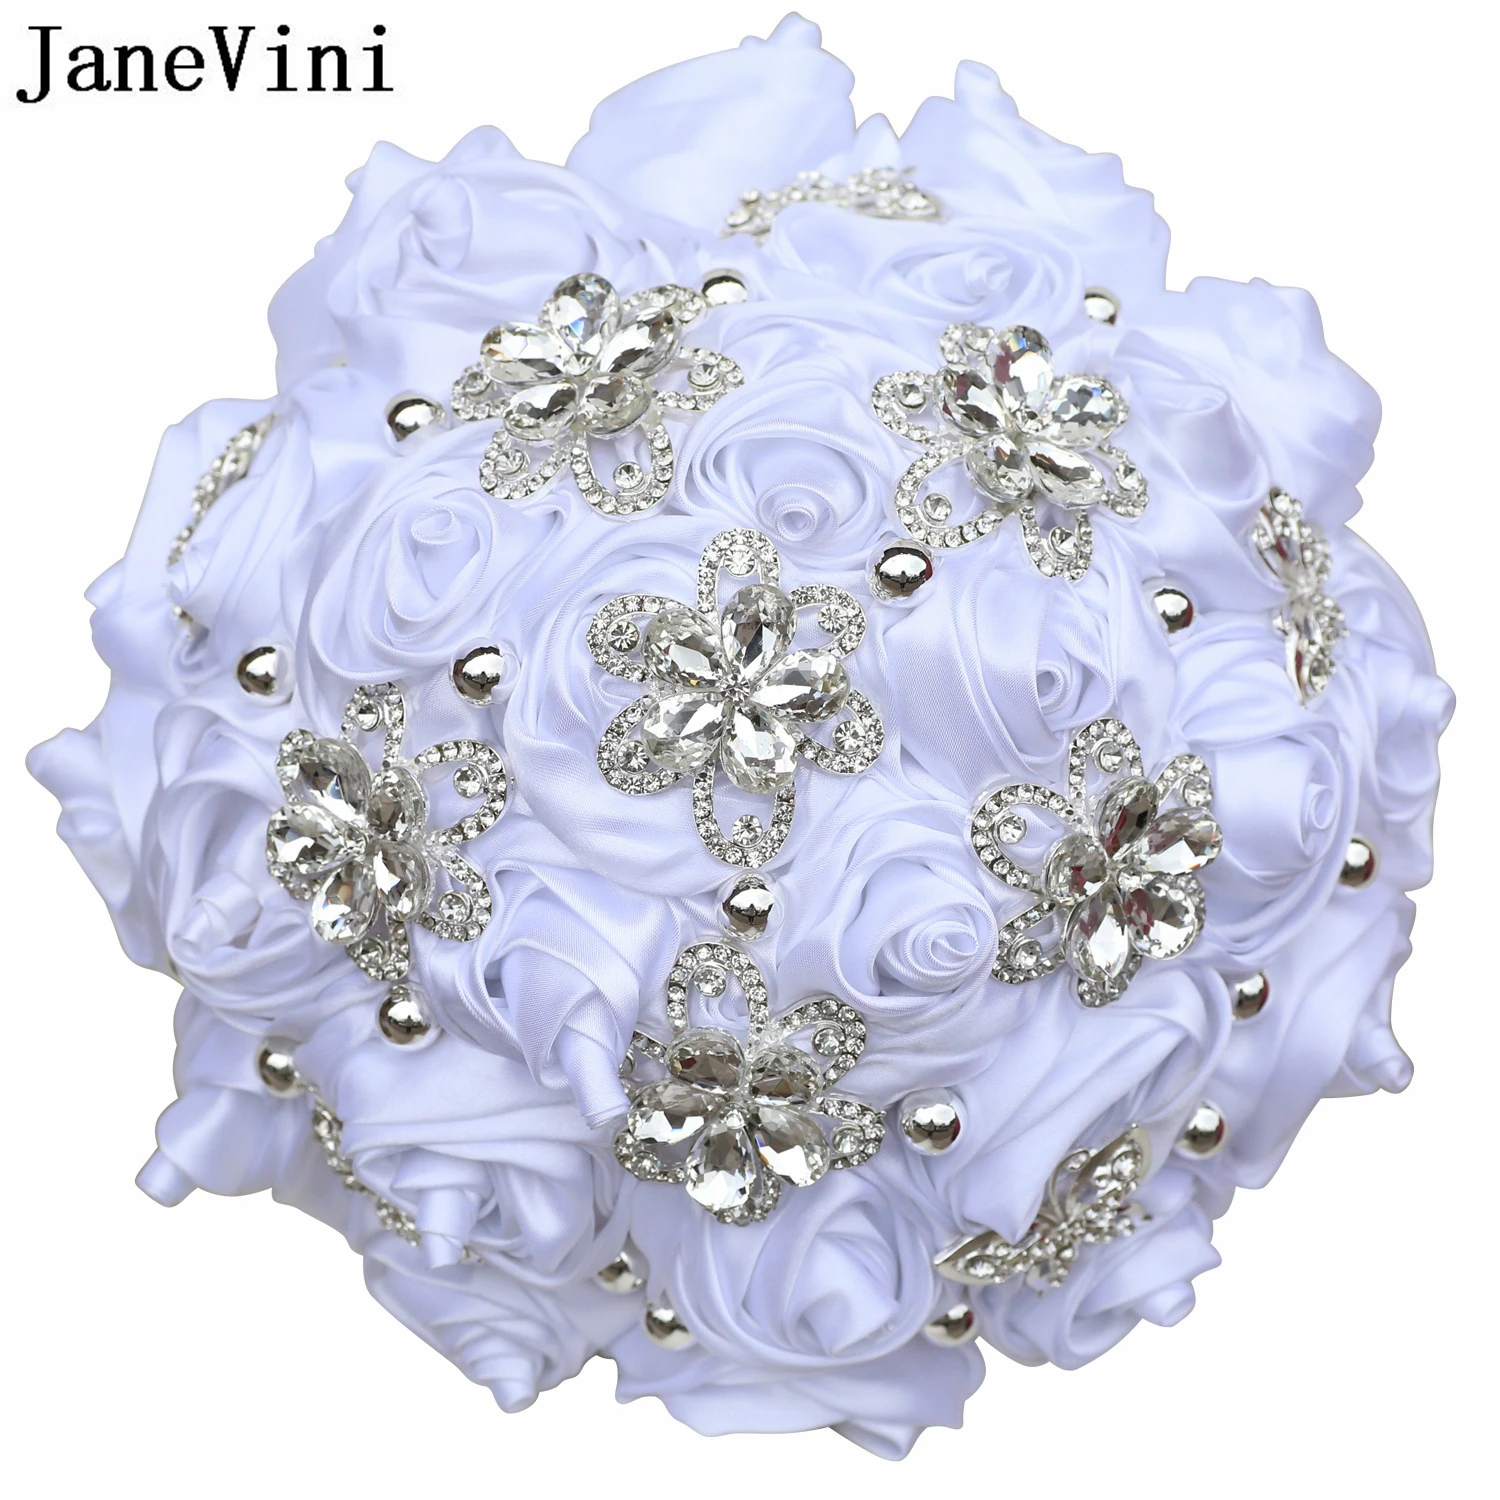 JaneVini White Bridal Bouquet Artificial Flowers Wedding Blingbling Silver Crystals Diamond Bride Bouquets Mariages Accessoire